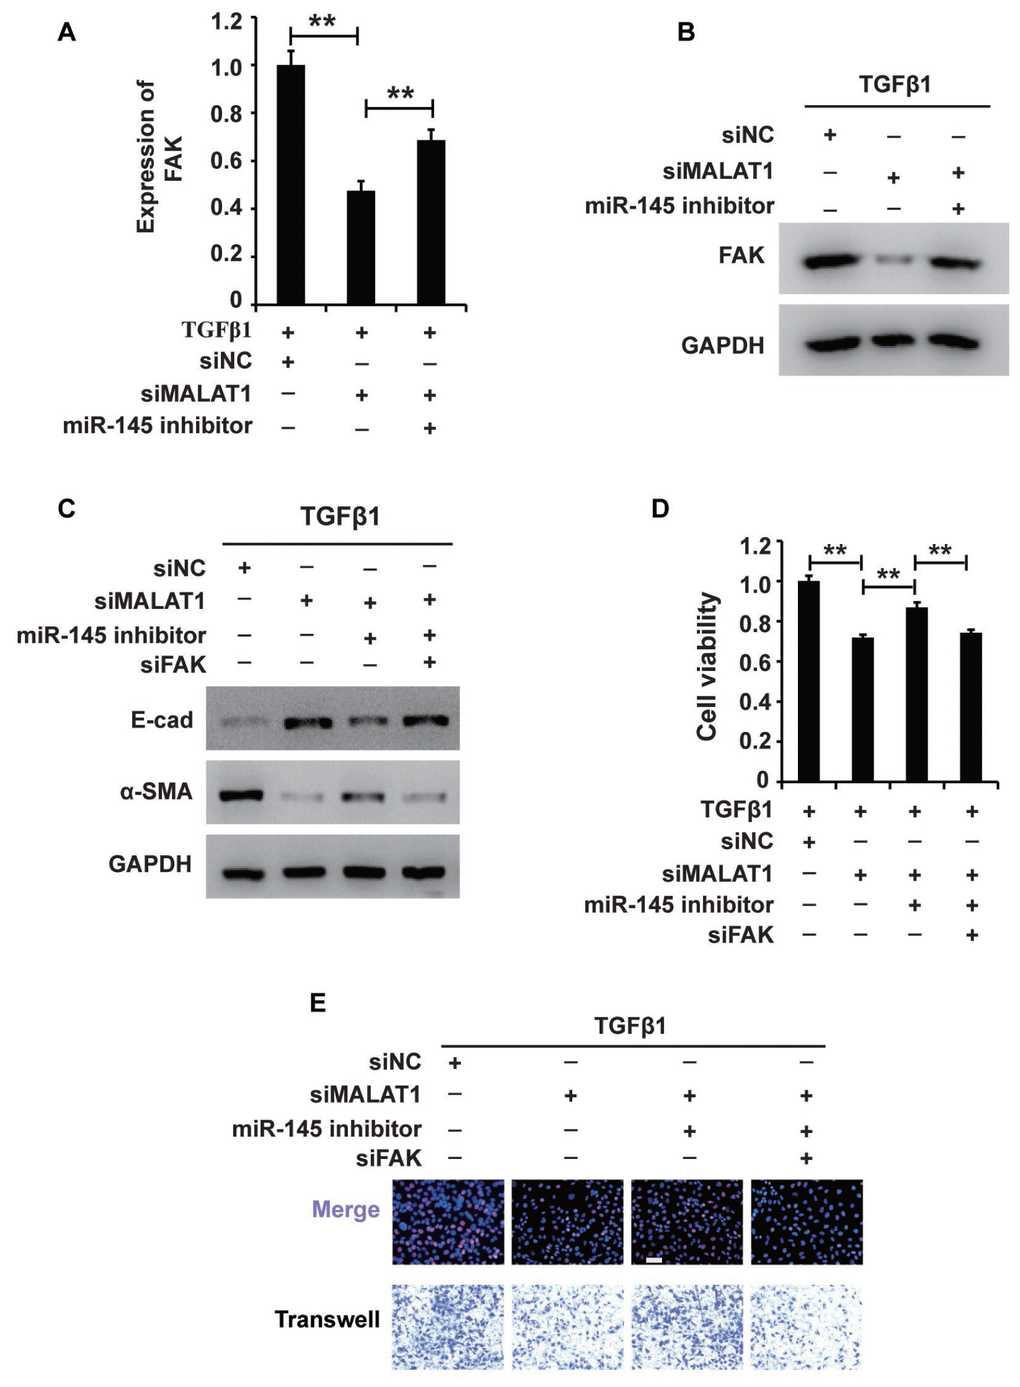 MALAT1 regulates the MALAT1/miR-145/FAK axis in HK2 cells treated with TGF-β1. (A and B) qRT-PCR and western blot analyses of FAK expression in HK2 cells treated with TGF-β1 alone or together with siMALAT1, a miR-145 inhibitor or a NC. (C) Western blot analyses of E-cadherin, vimentin, α-SMA and collagen I expression in HK2 cells receiving different treatments. (D and E) CCK8, EdU and cell migration analyses of the viability, proliferation and migration of HK2 cells receiving different treatments. GAPDH was used as a control. *P P 